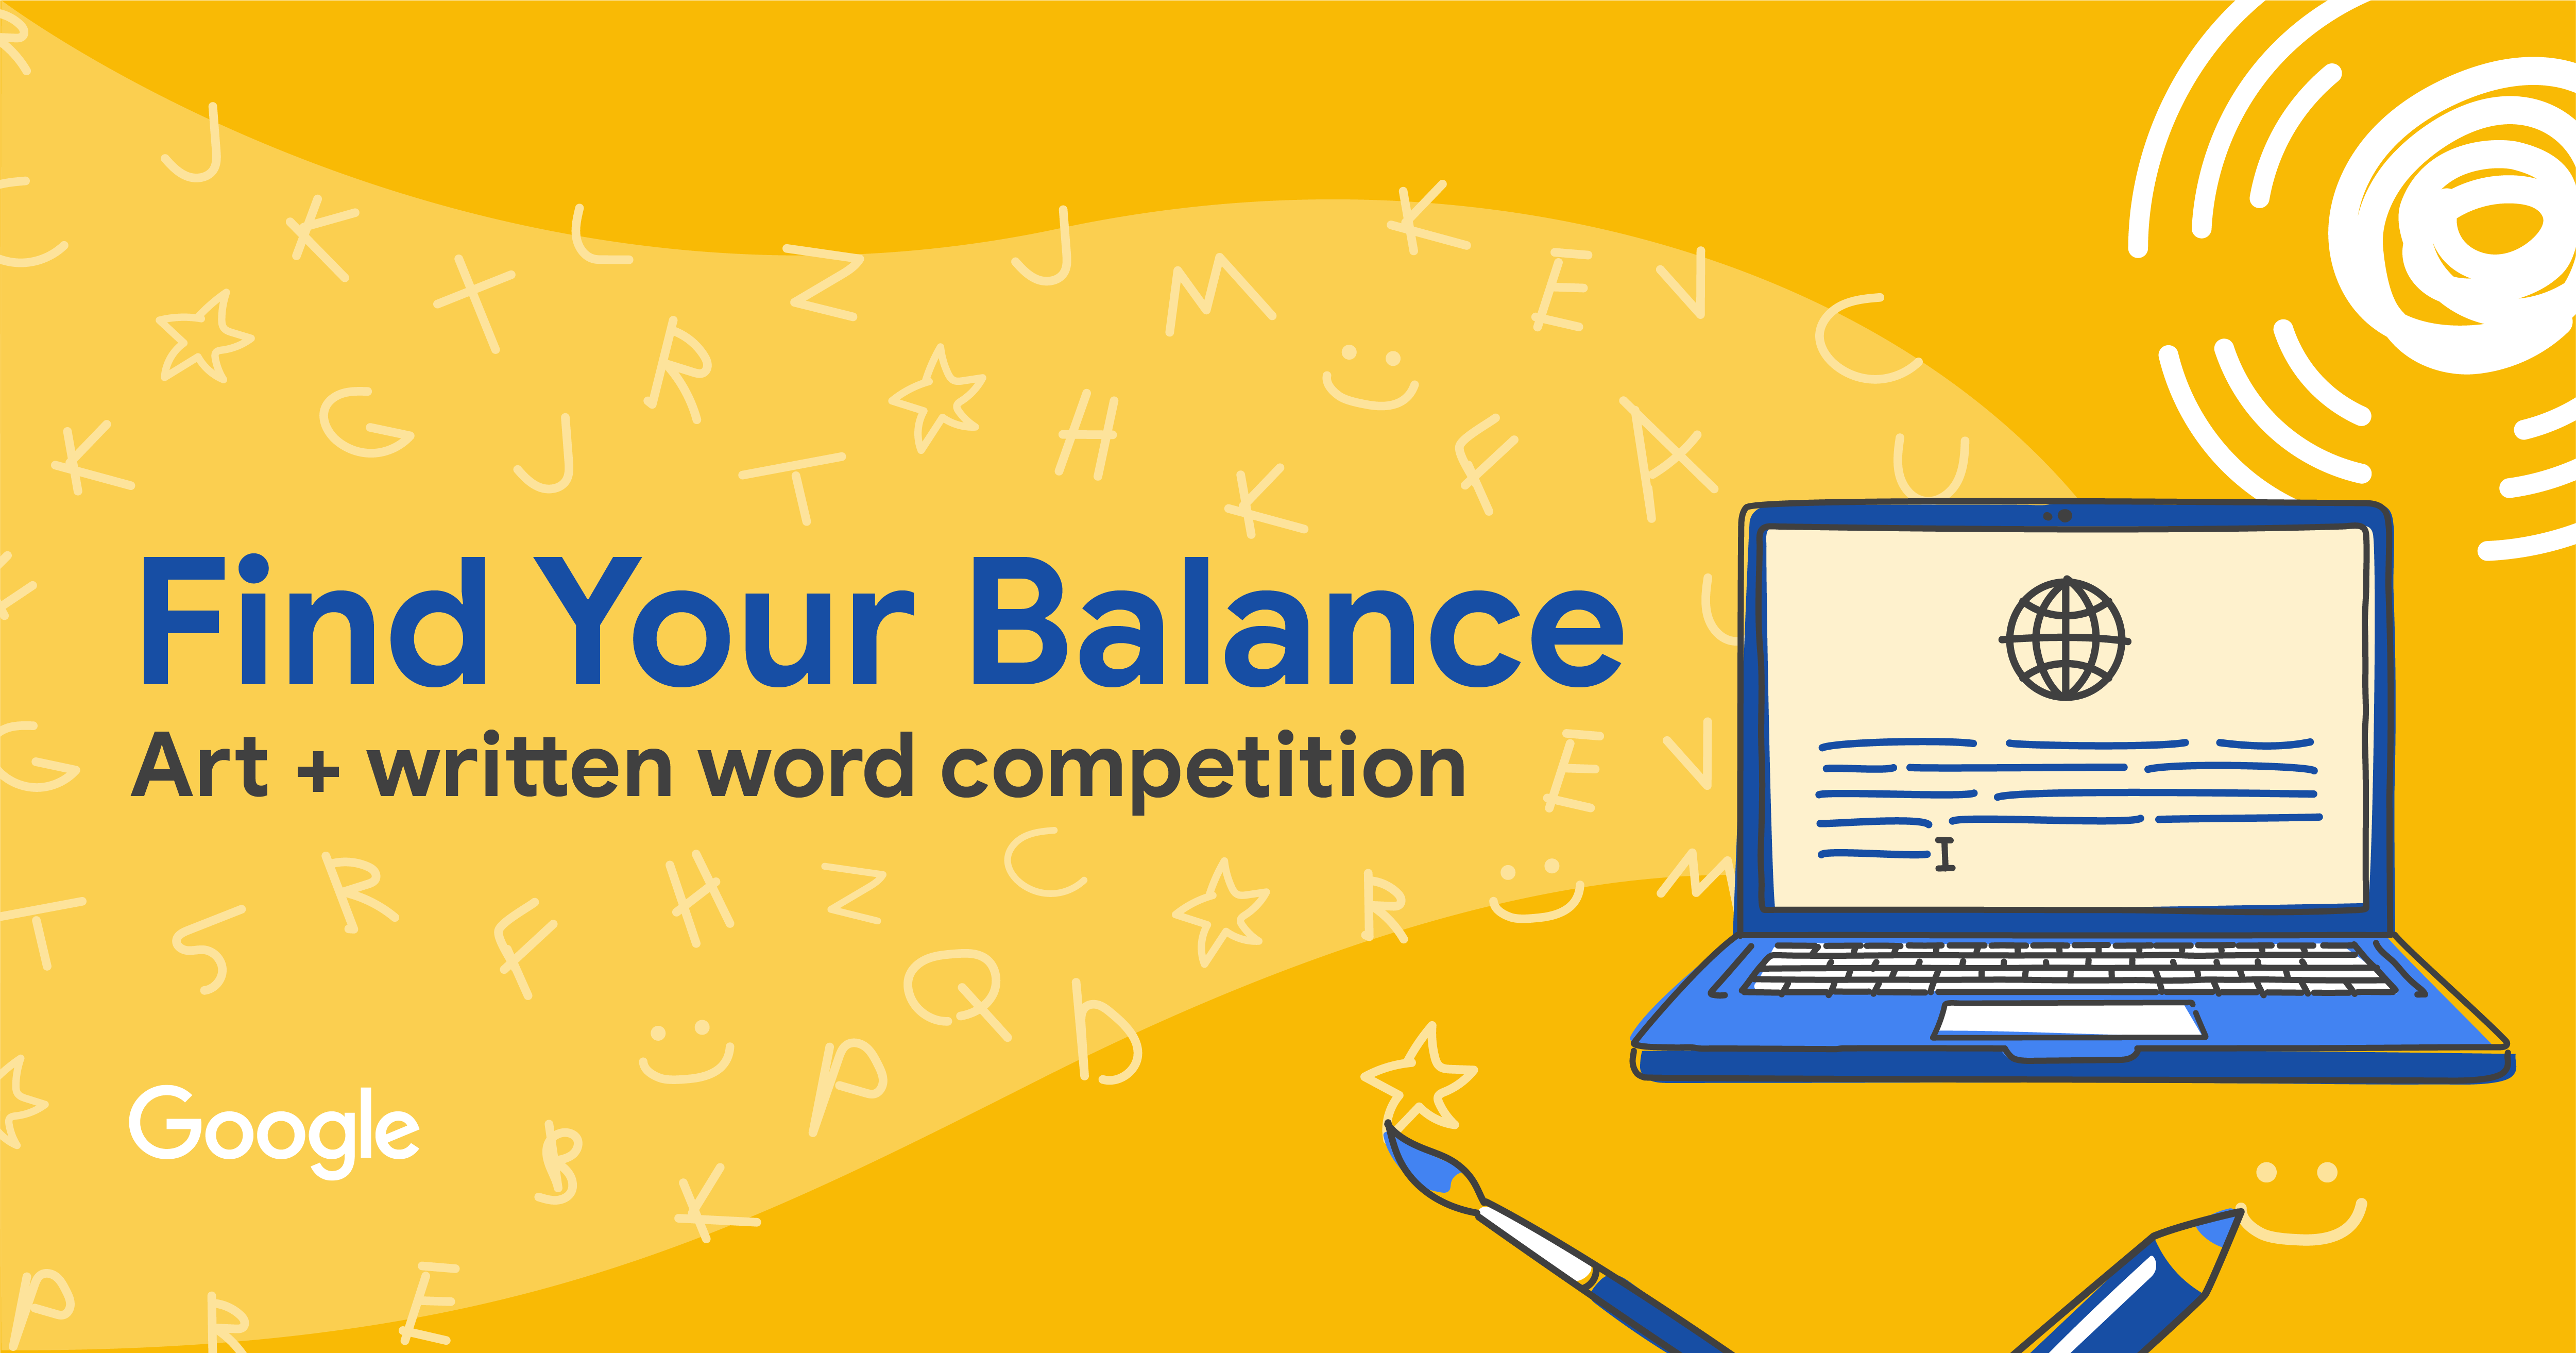 Find Your Balance competition banner